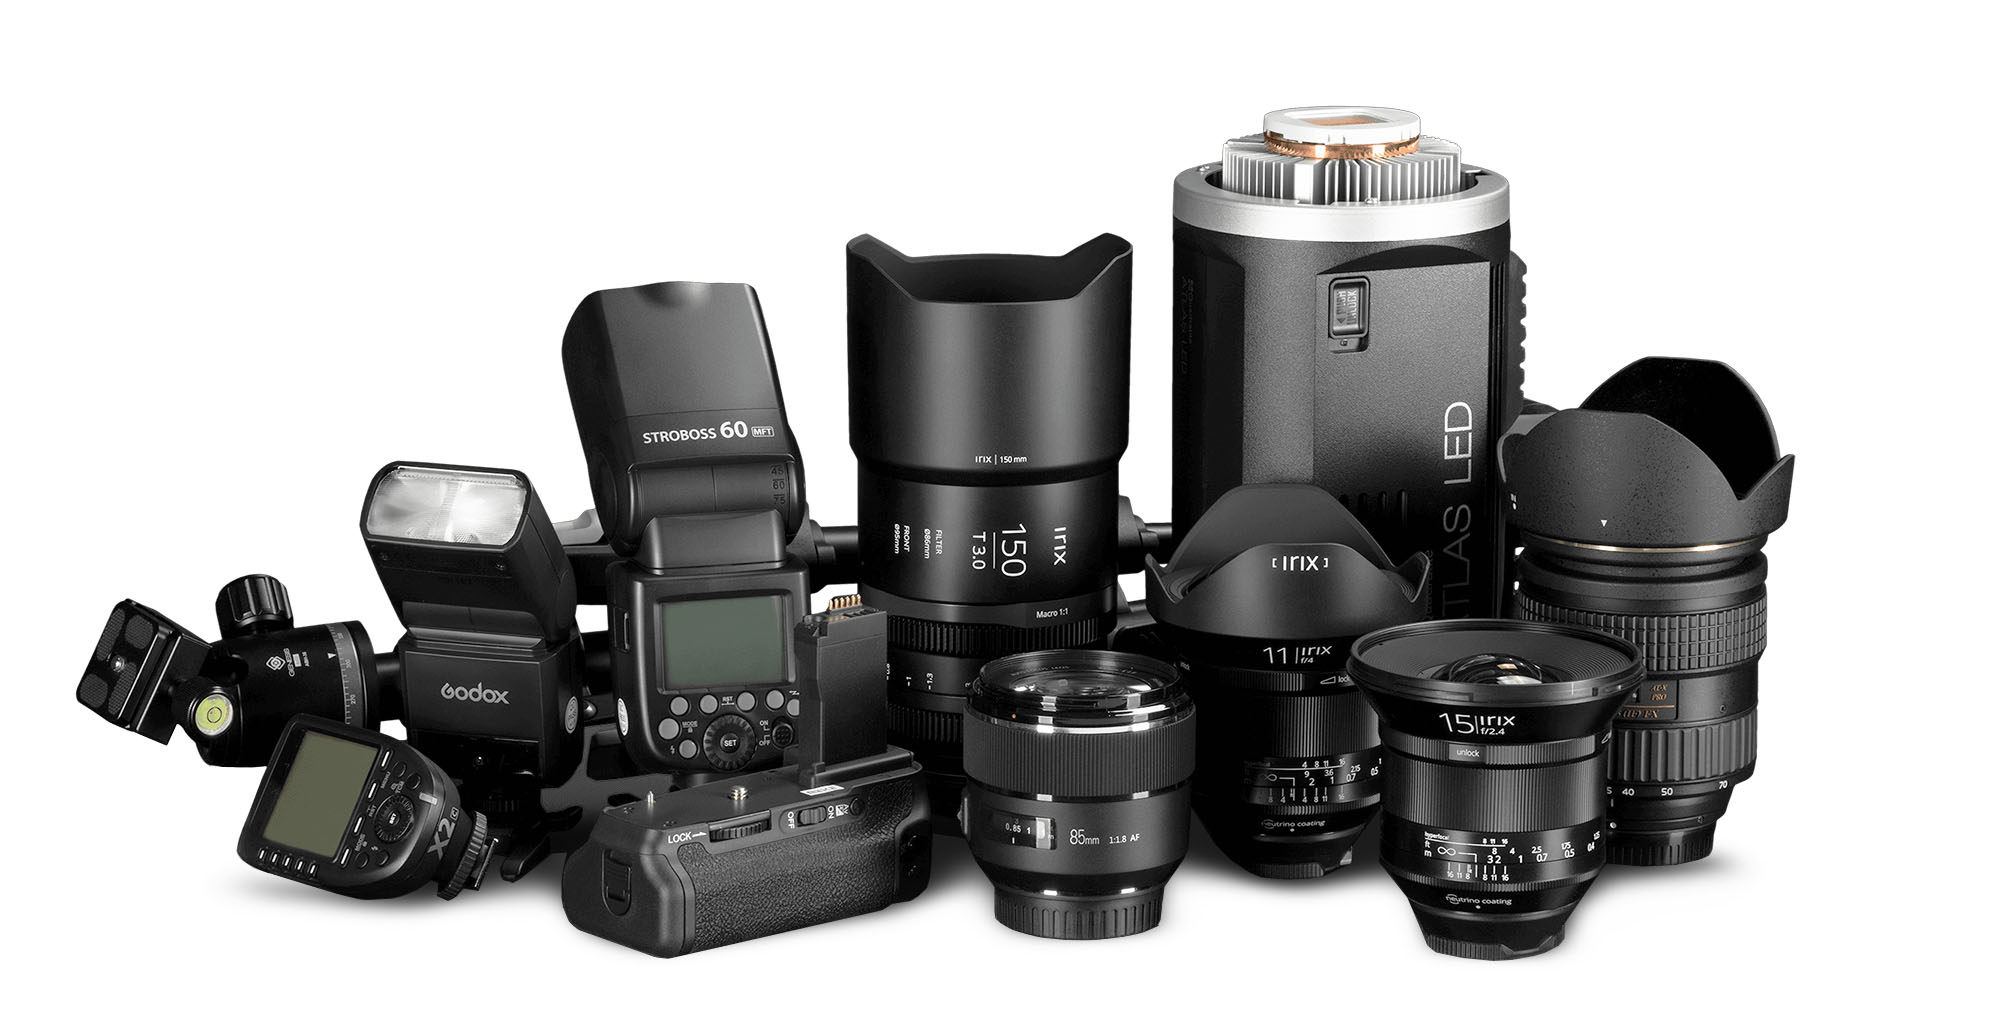 next77 provide high quality photographic and film equipment